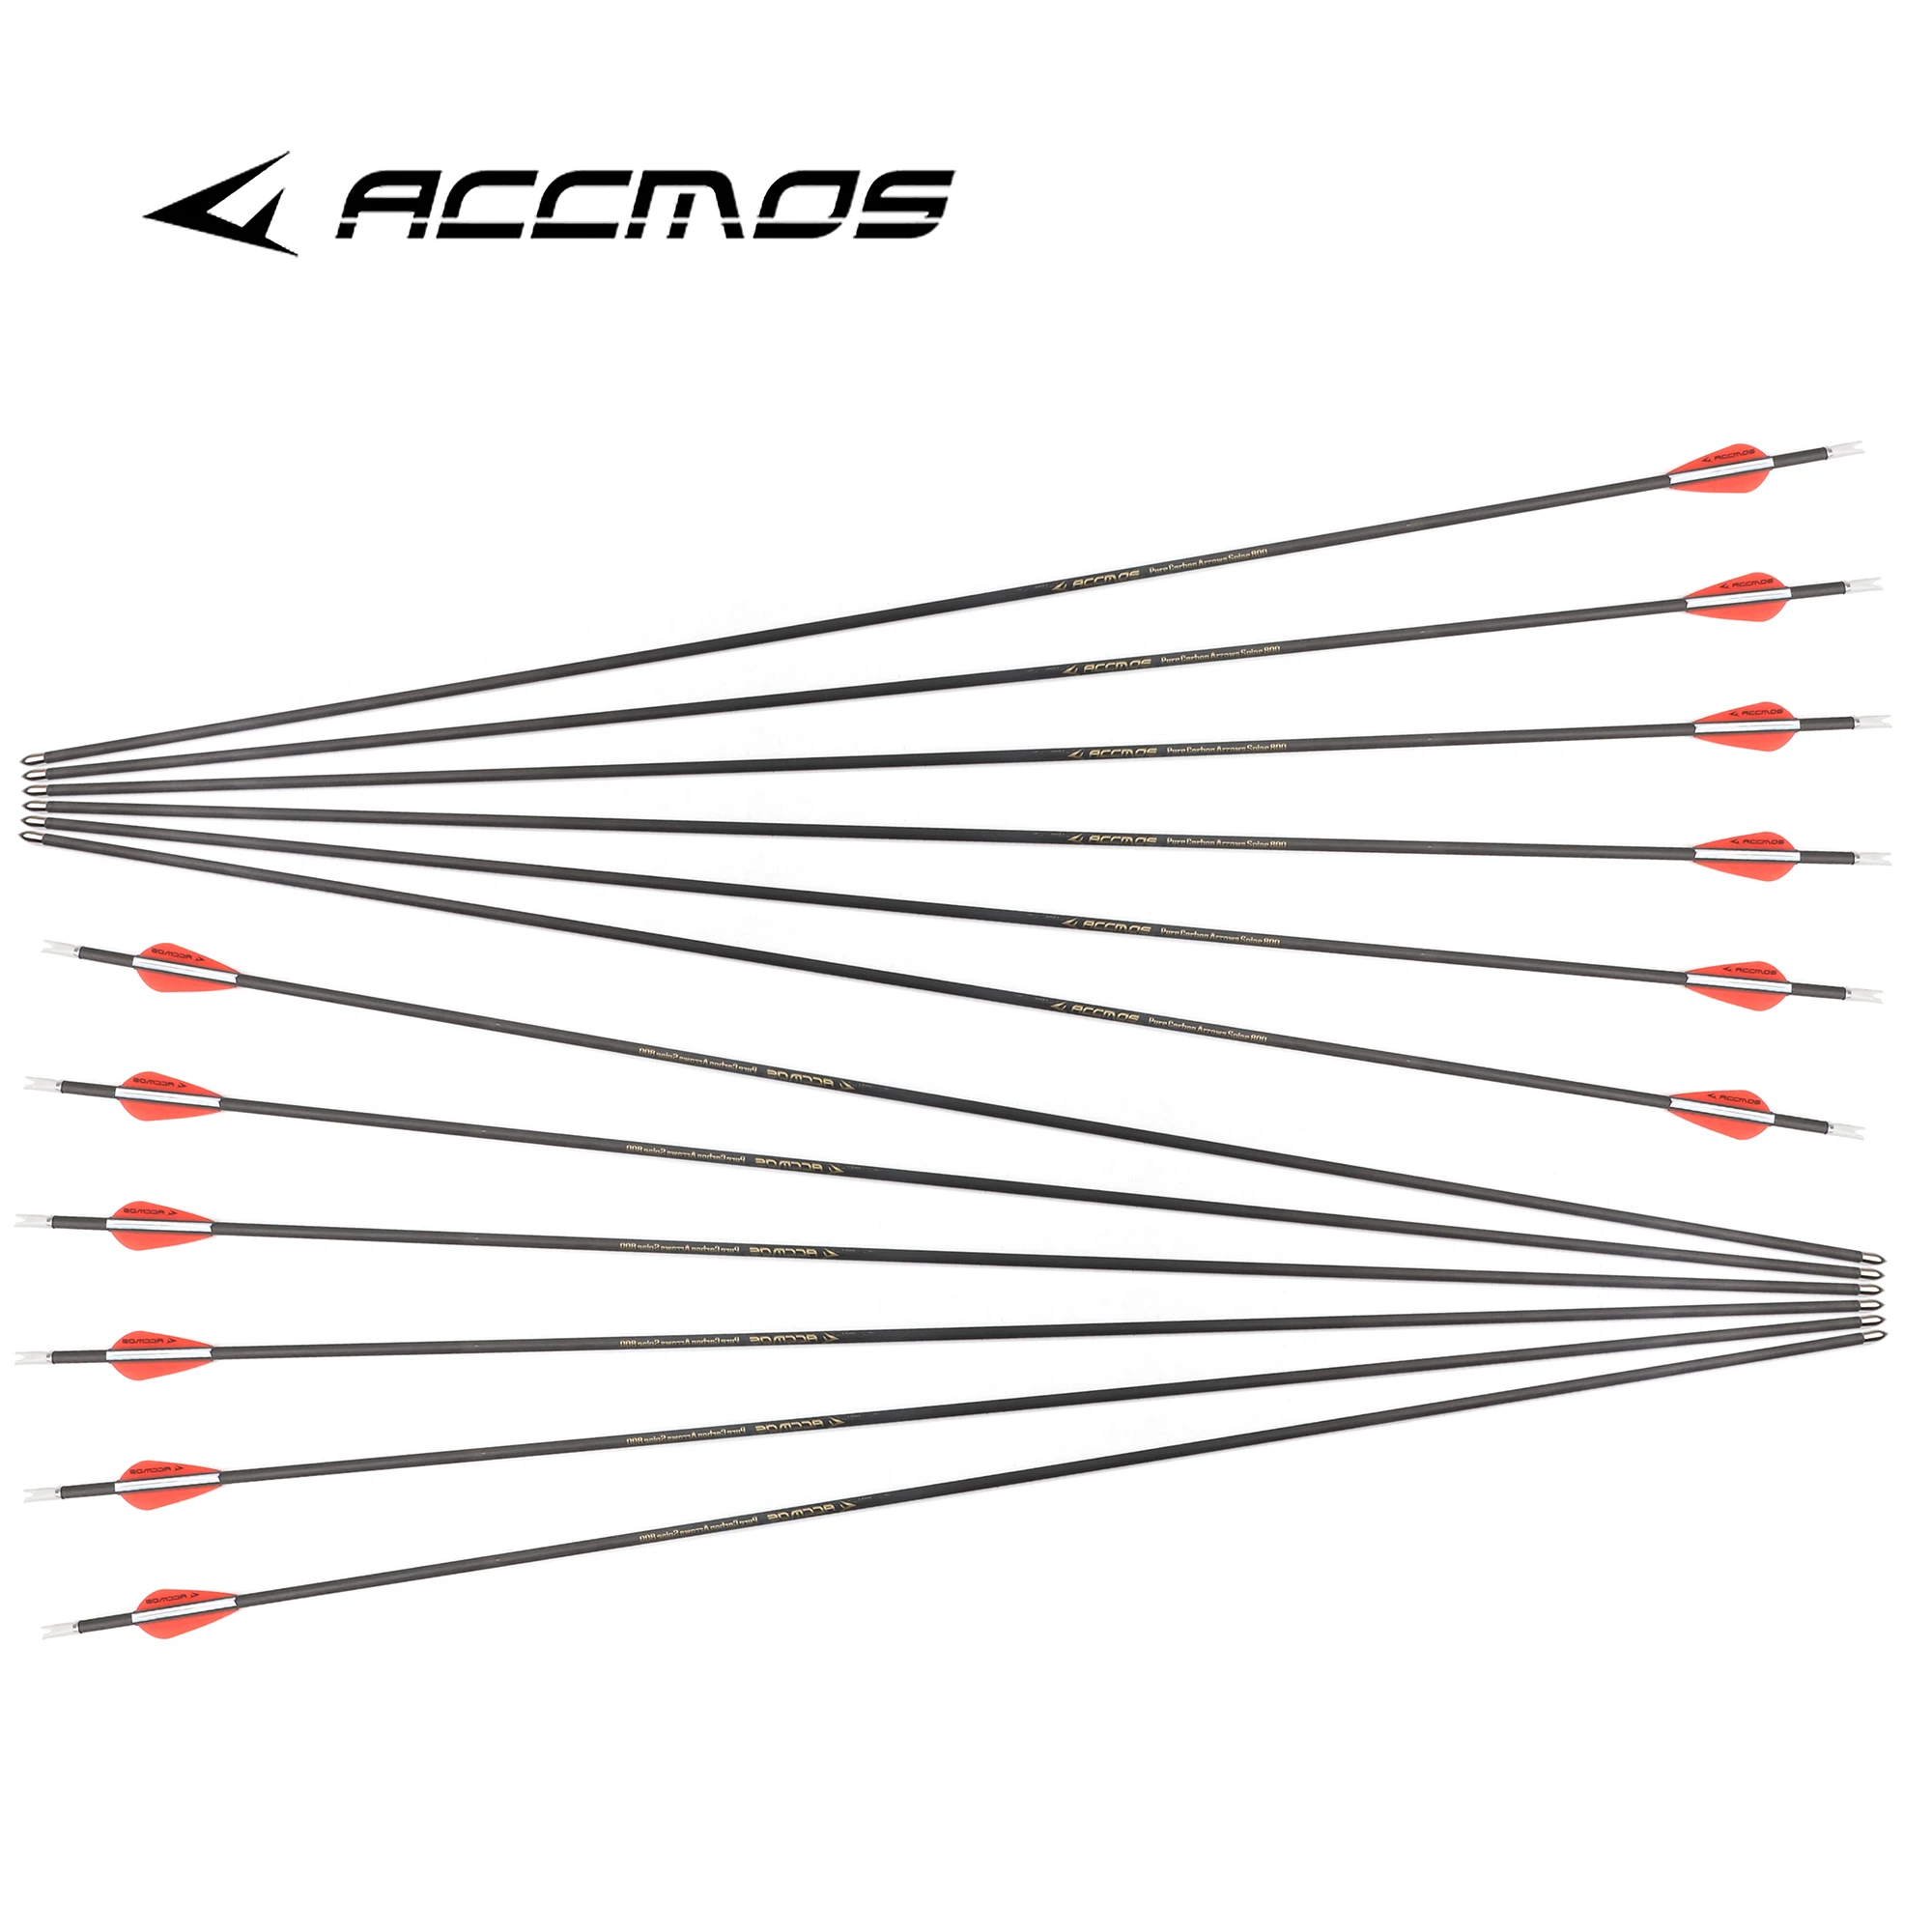 

12pcs ID4.2mm 32in Pure Carbon Arrow Spine 500 600 700 800 900 1000 1100 1300 1500 1800 for Archery Recurve Bow Hunting Shooting